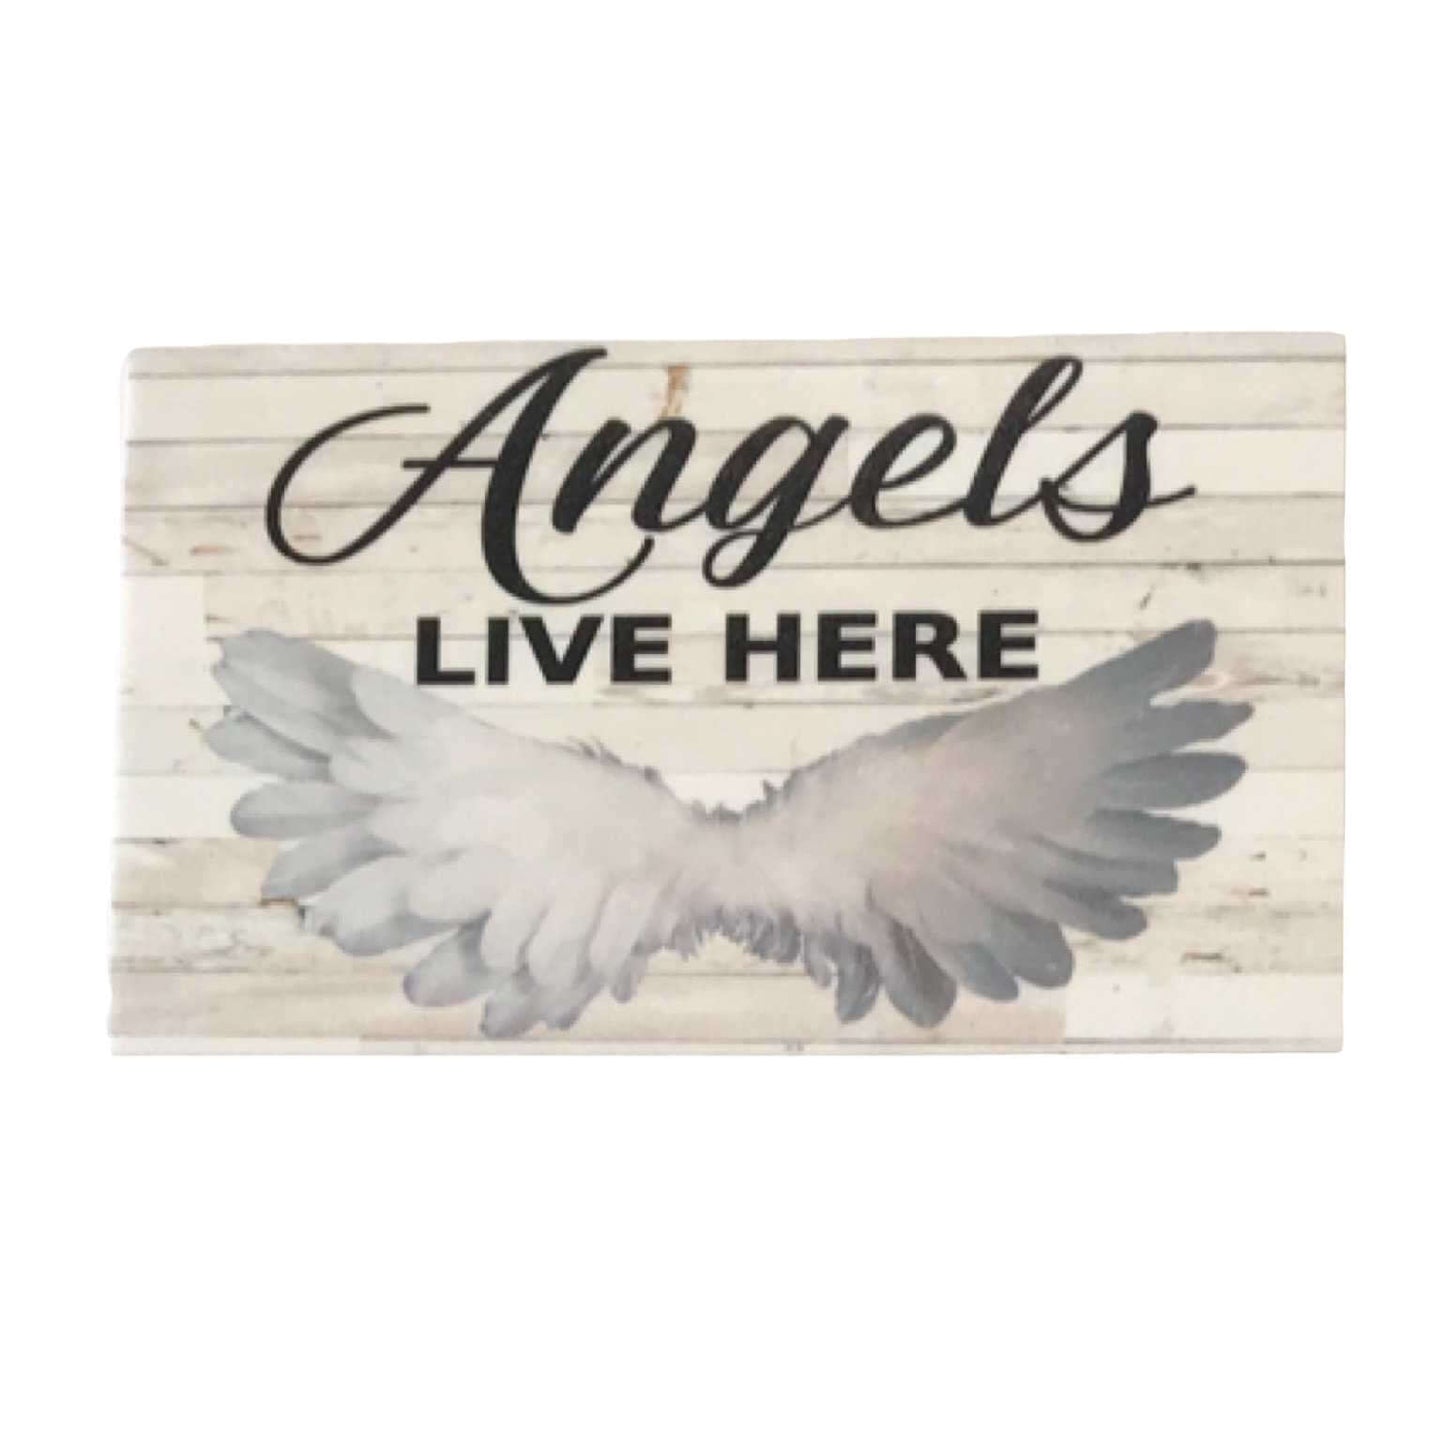 Angels Live Here Rustic White Sign - The Renmy Store Homewares & Gifts 